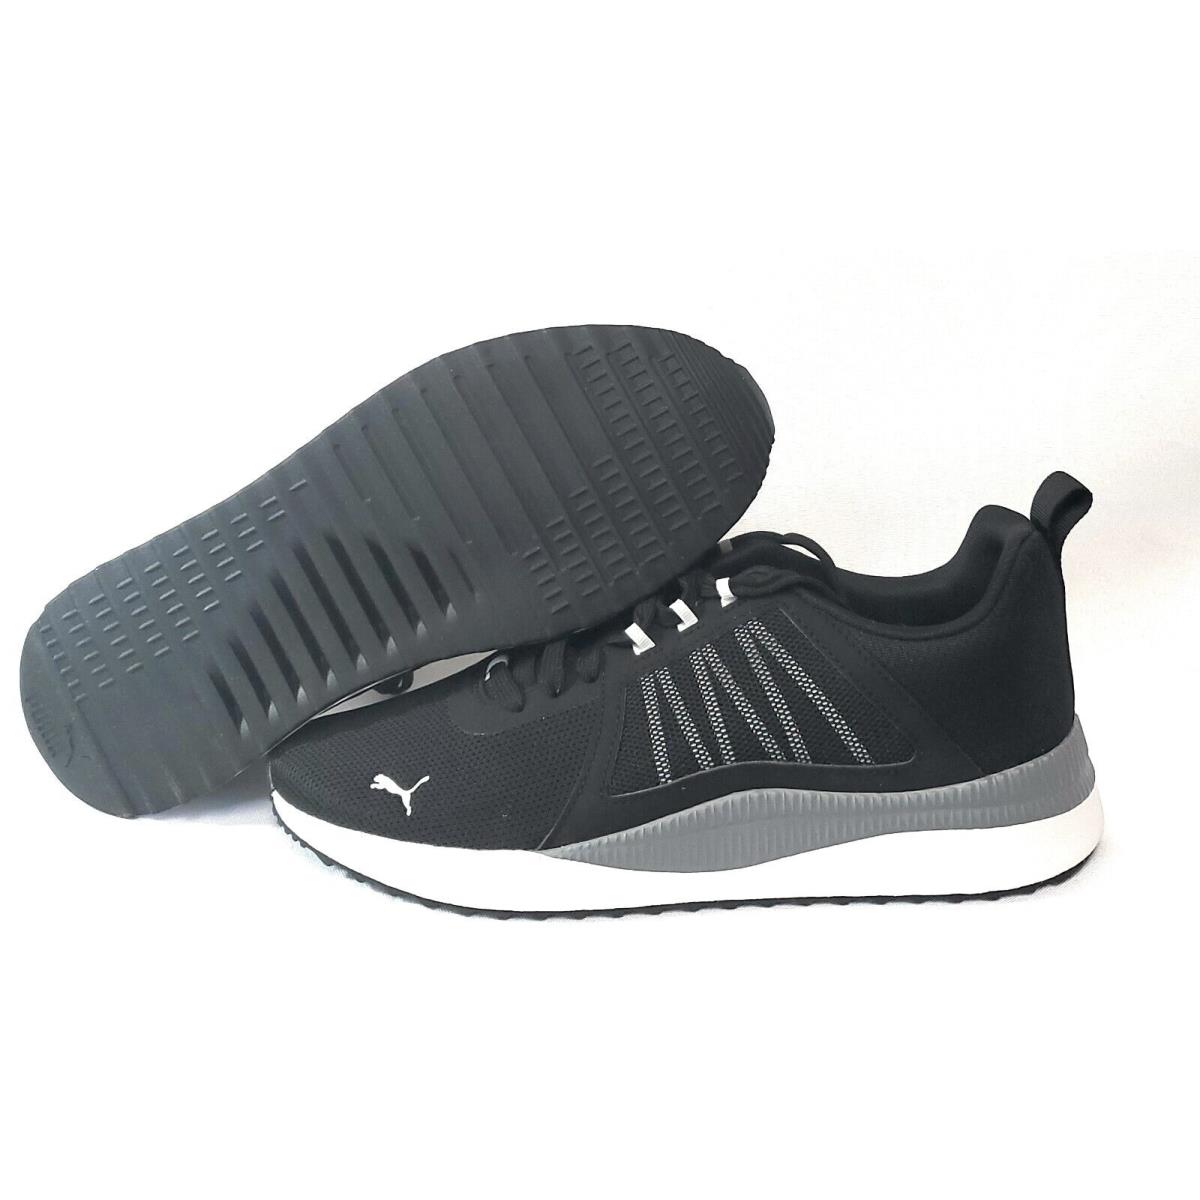 Mens Puma Pacer Net Cage 374322 01 Black White Grey Sneakers Shoes